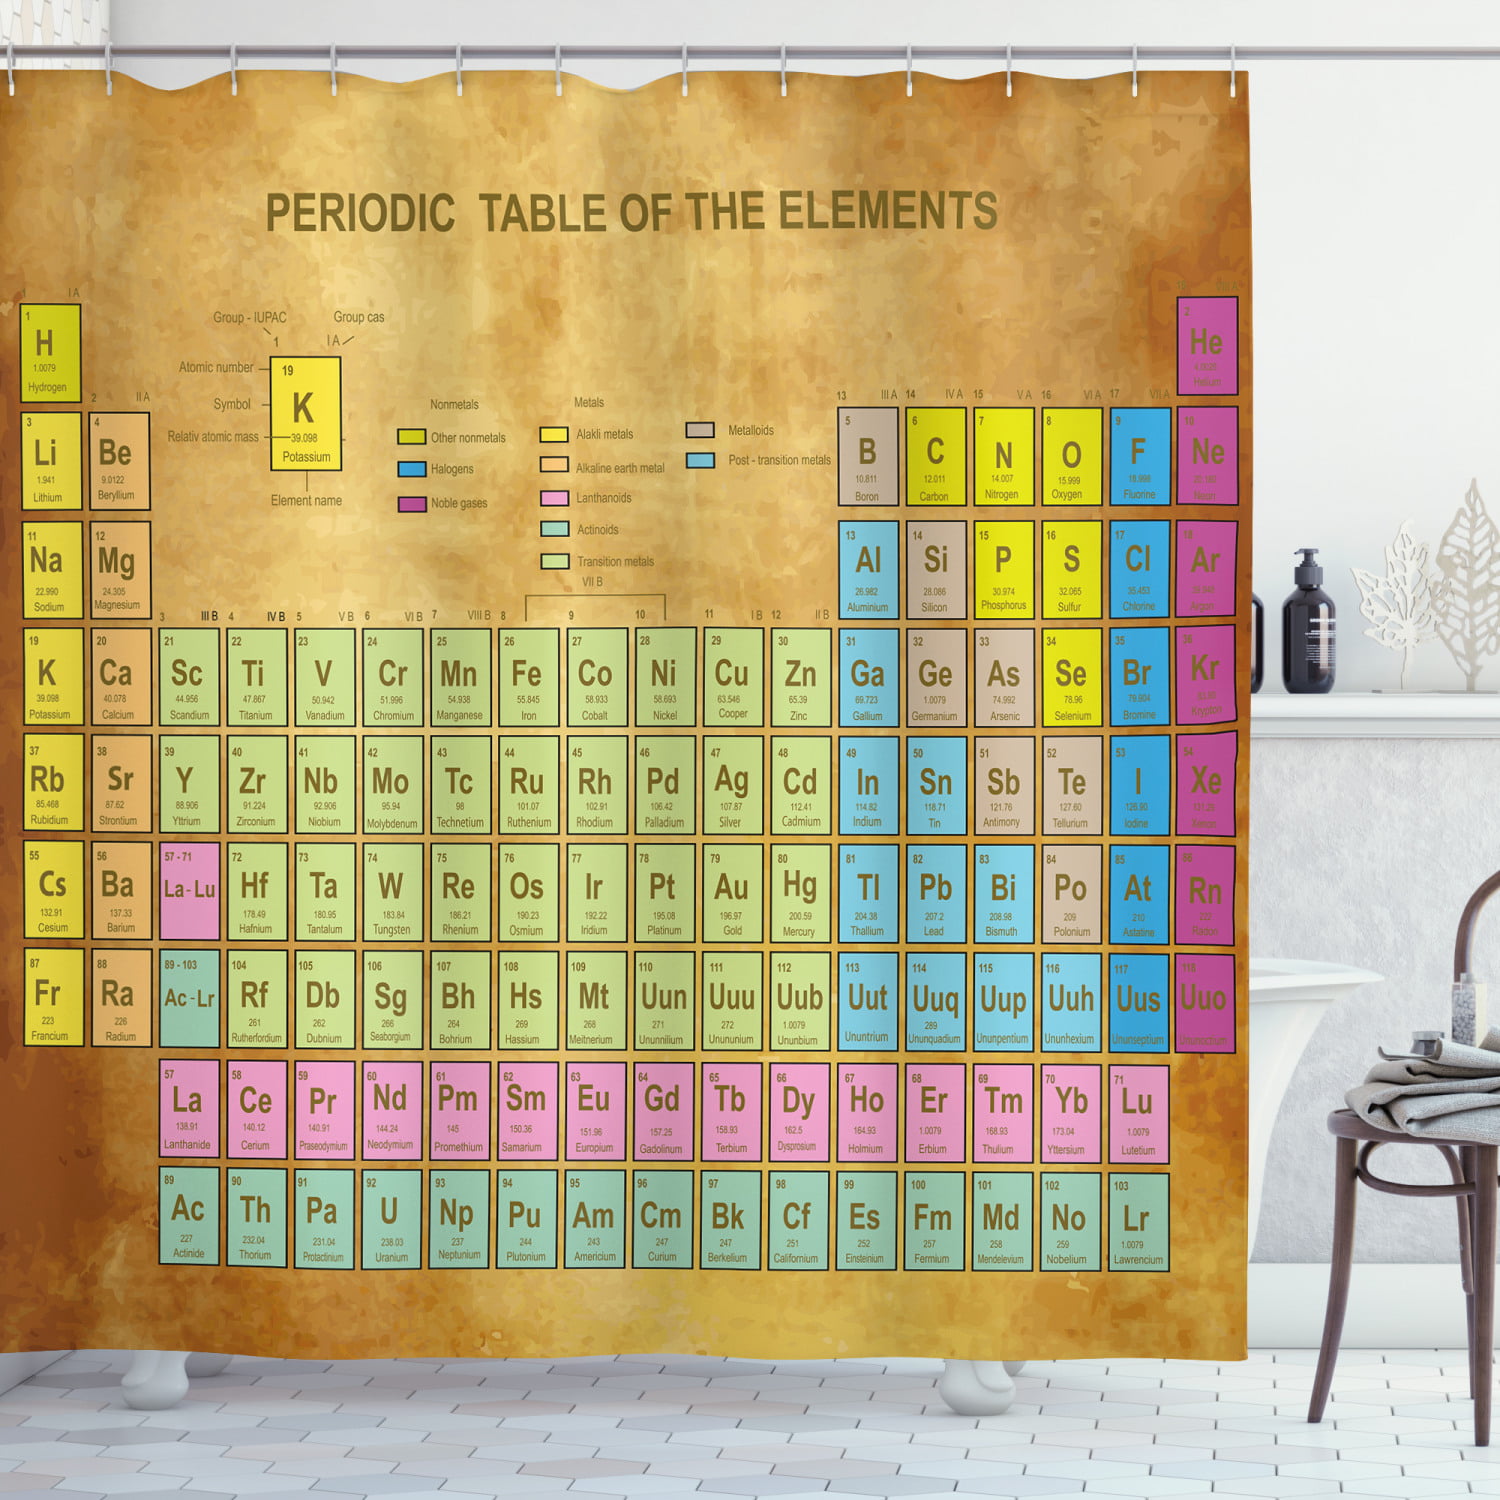 PeriodicTable of Elements Shower Curtain Use as Poster 72x72 inches 100% Polyest 